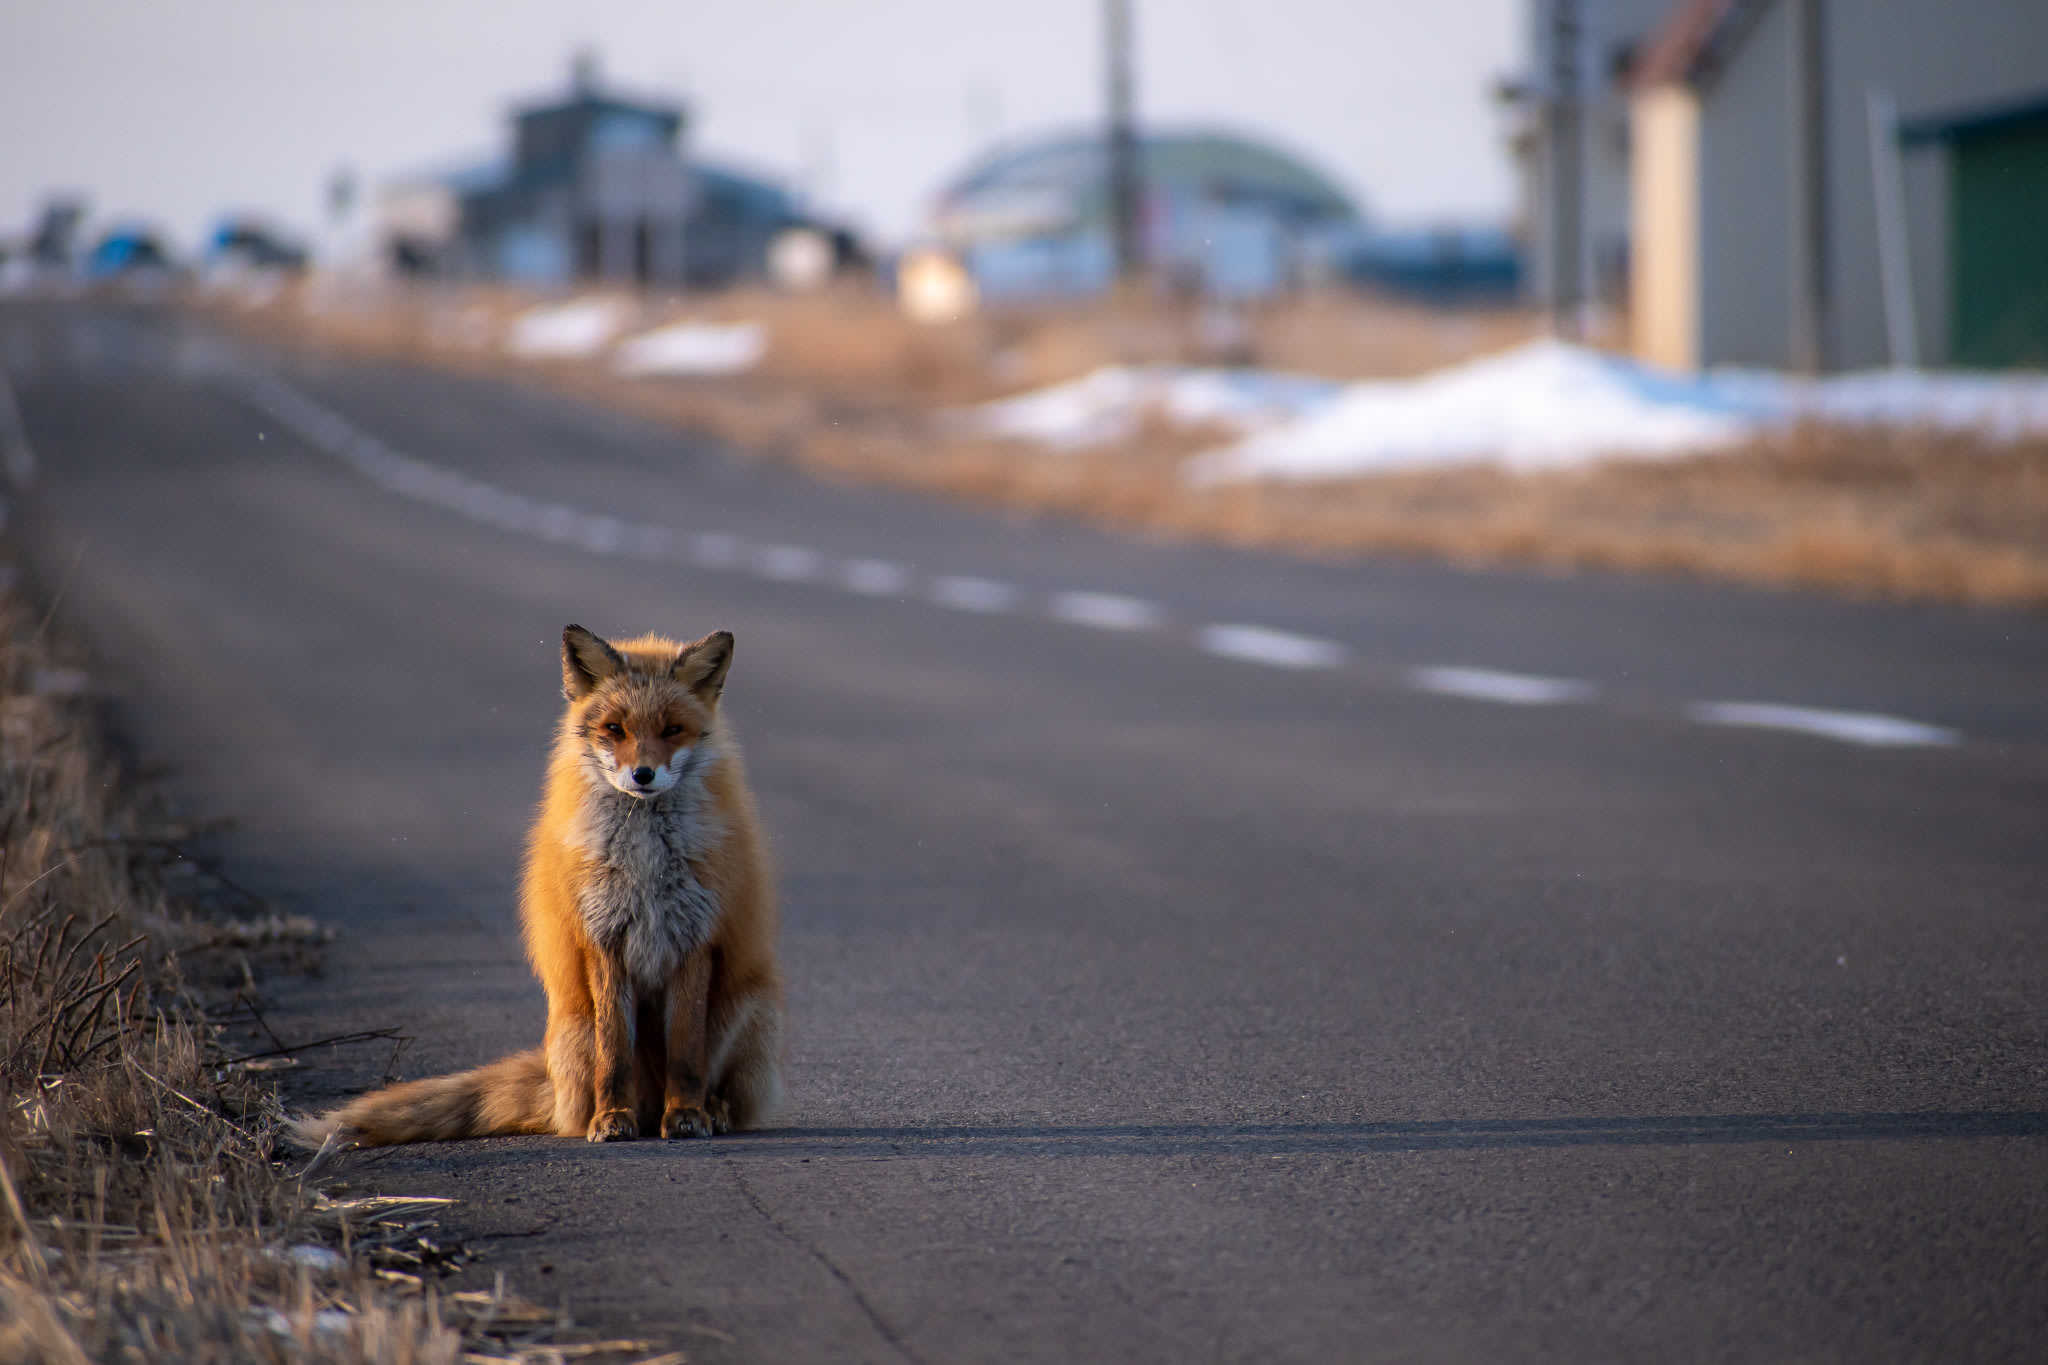 A fluffy red fox in its winter coat sits on an asphalt road, staring directly at the viewer.